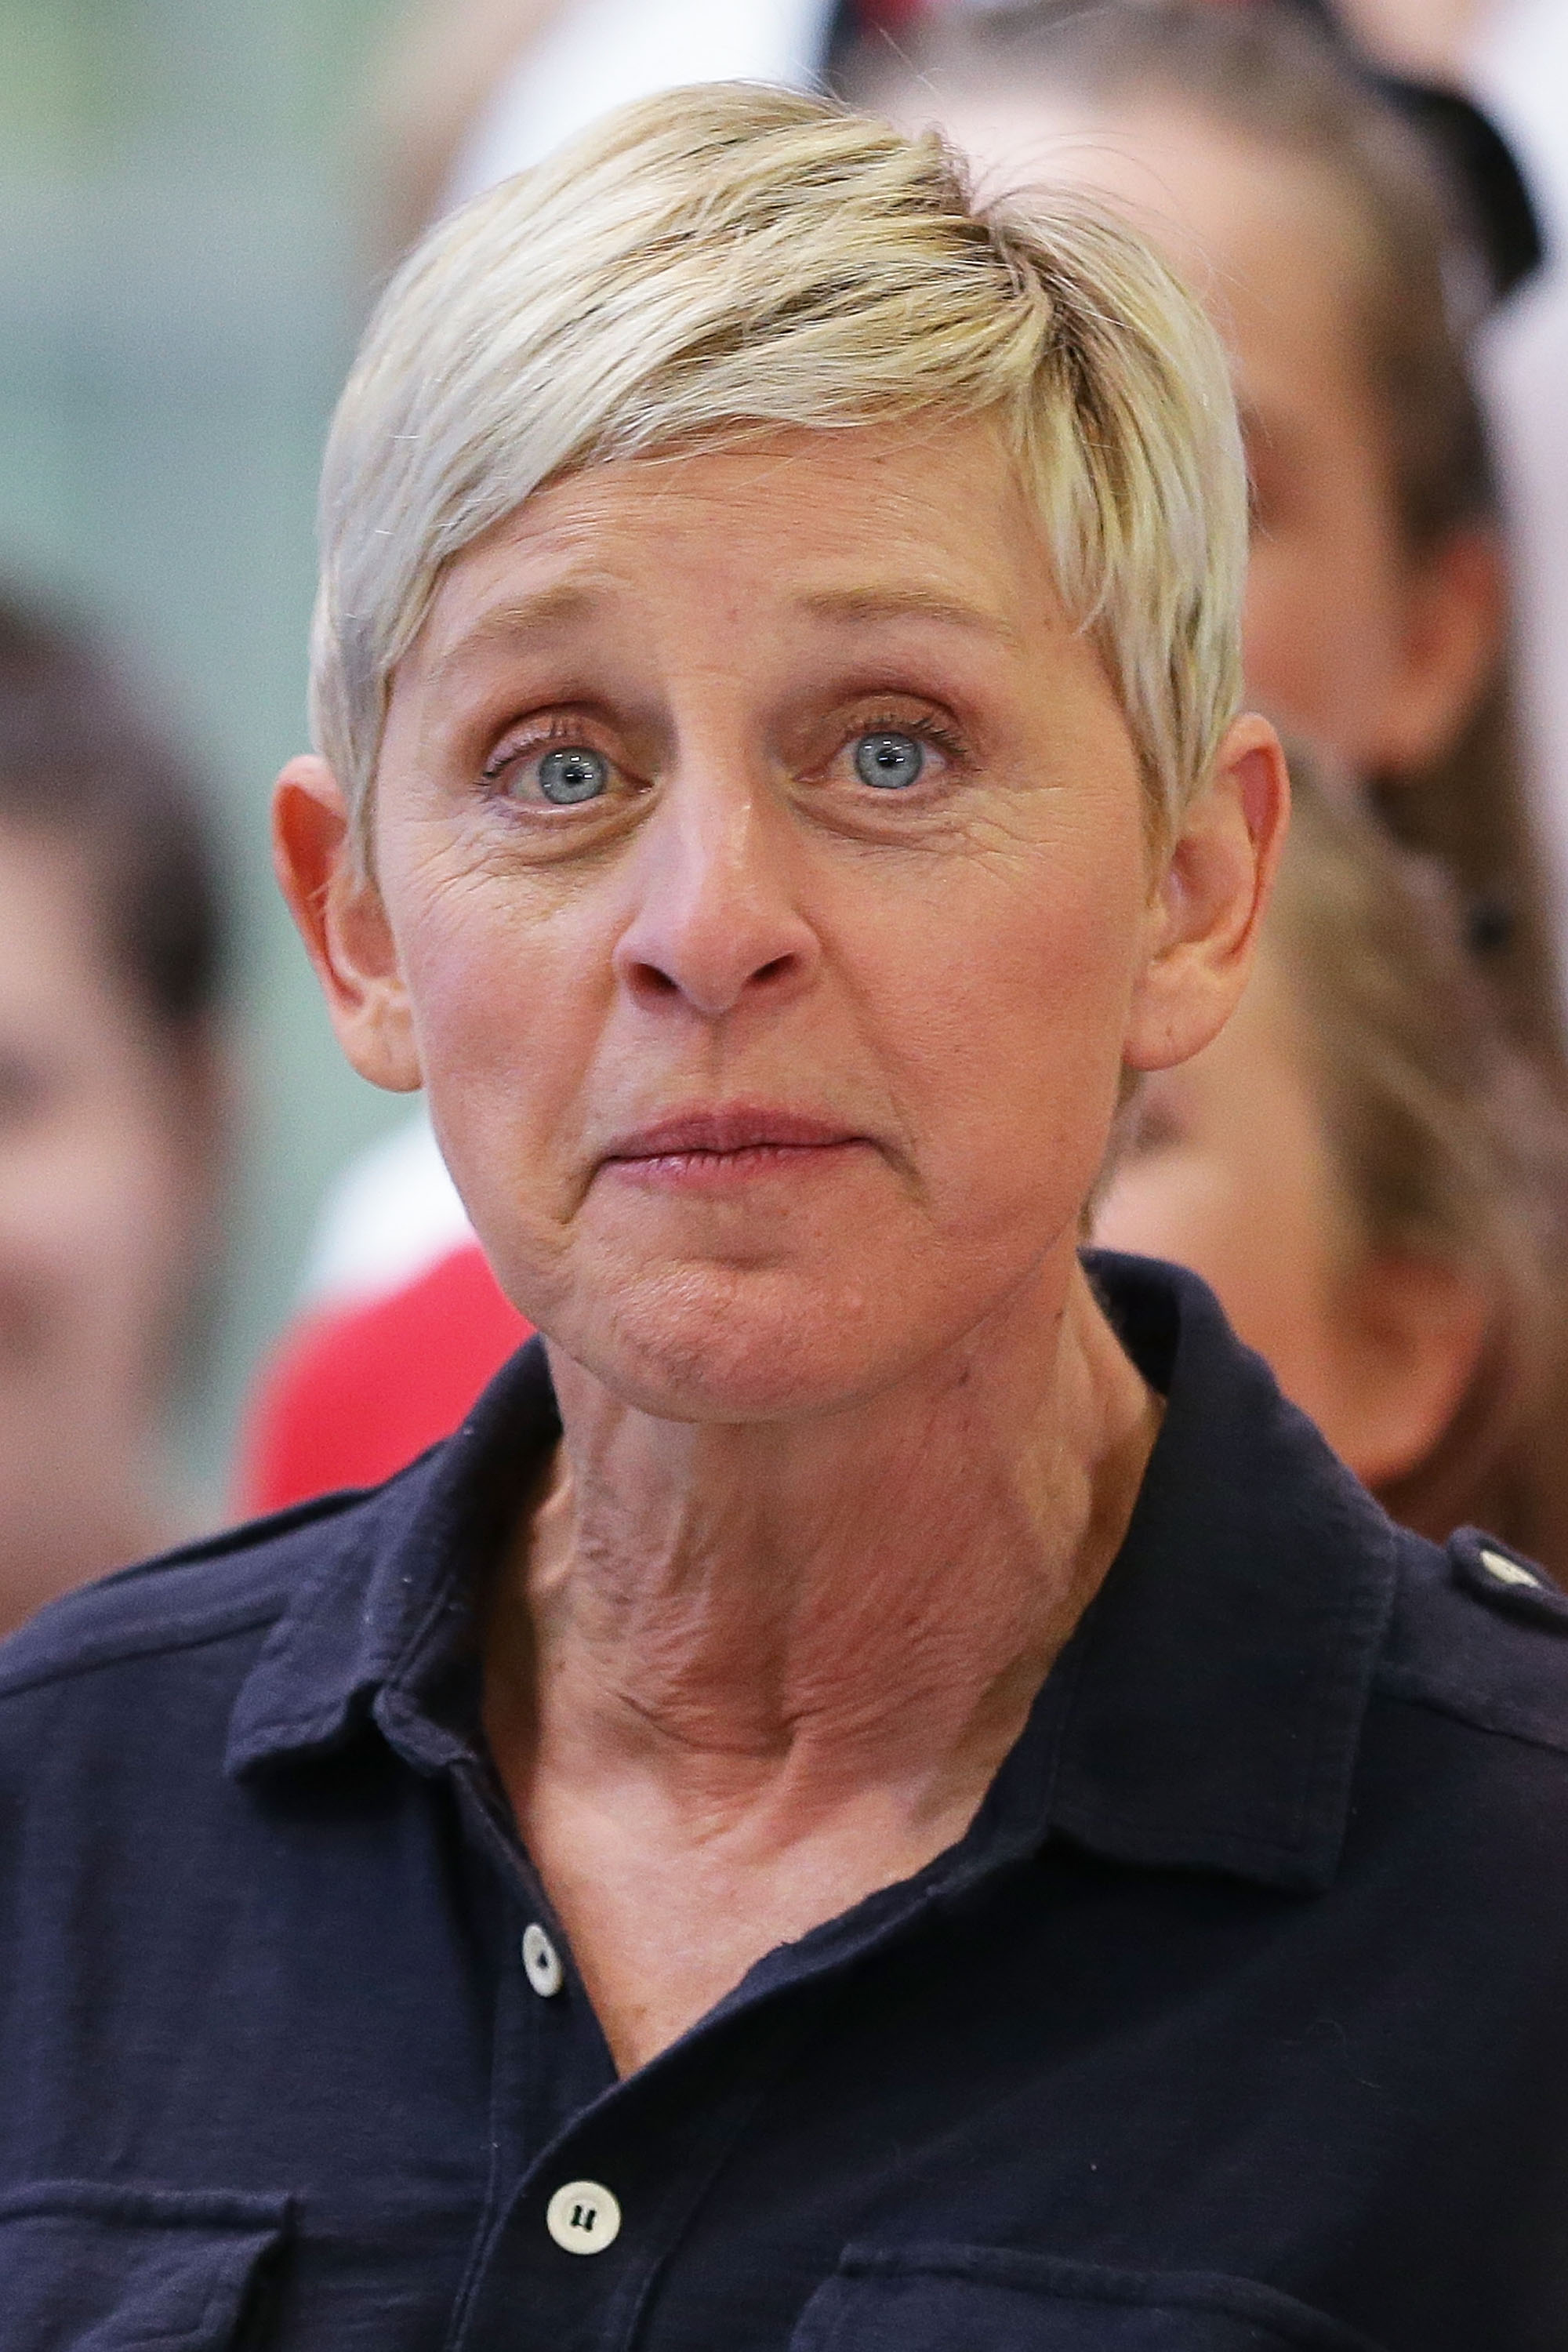 Ellen DeGeneres at the Sydney Airport in Sydney, Australia on March 22, 2013 | Photo: Getty Images